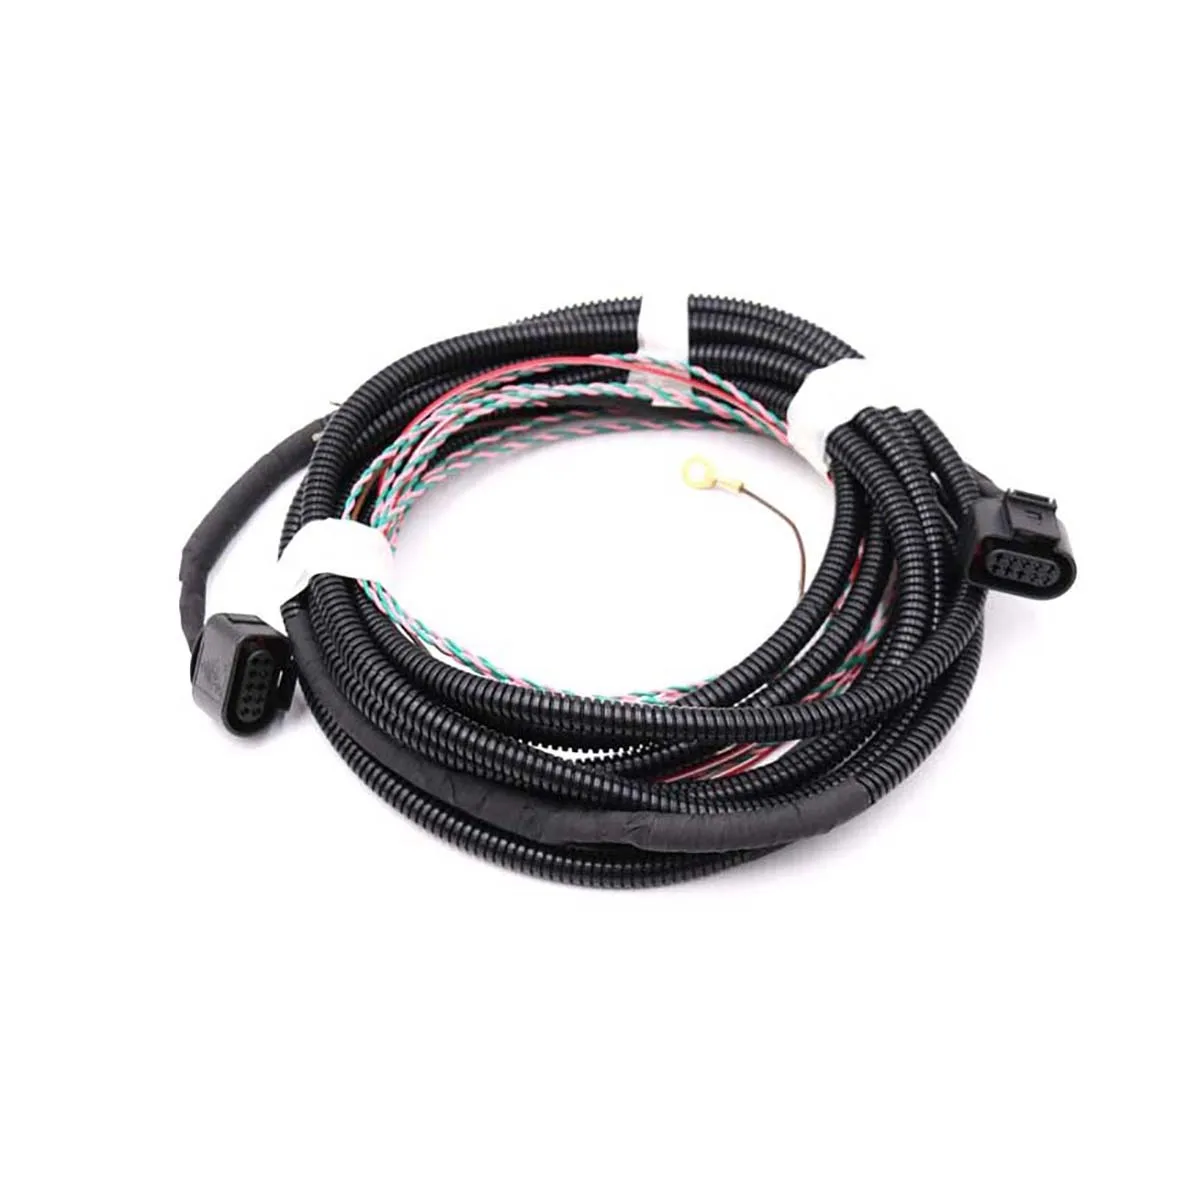 Intersection Movement assist Wire Cable Harness For NEW touareg 2019 +